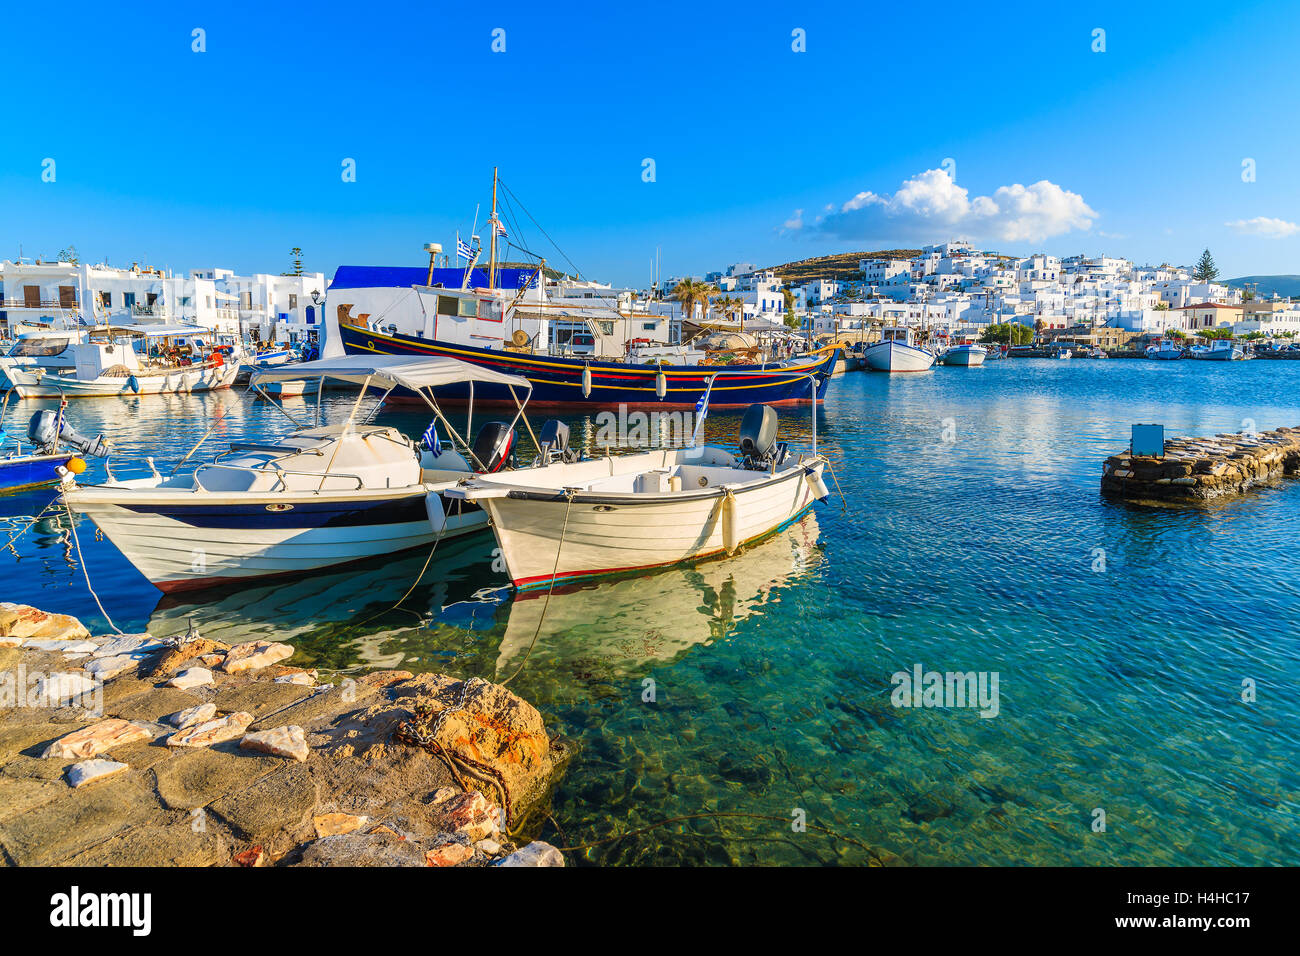 Fishing boats in Naoussa port at sunset time, Paros island, Cyclades, Greece Stock Photo